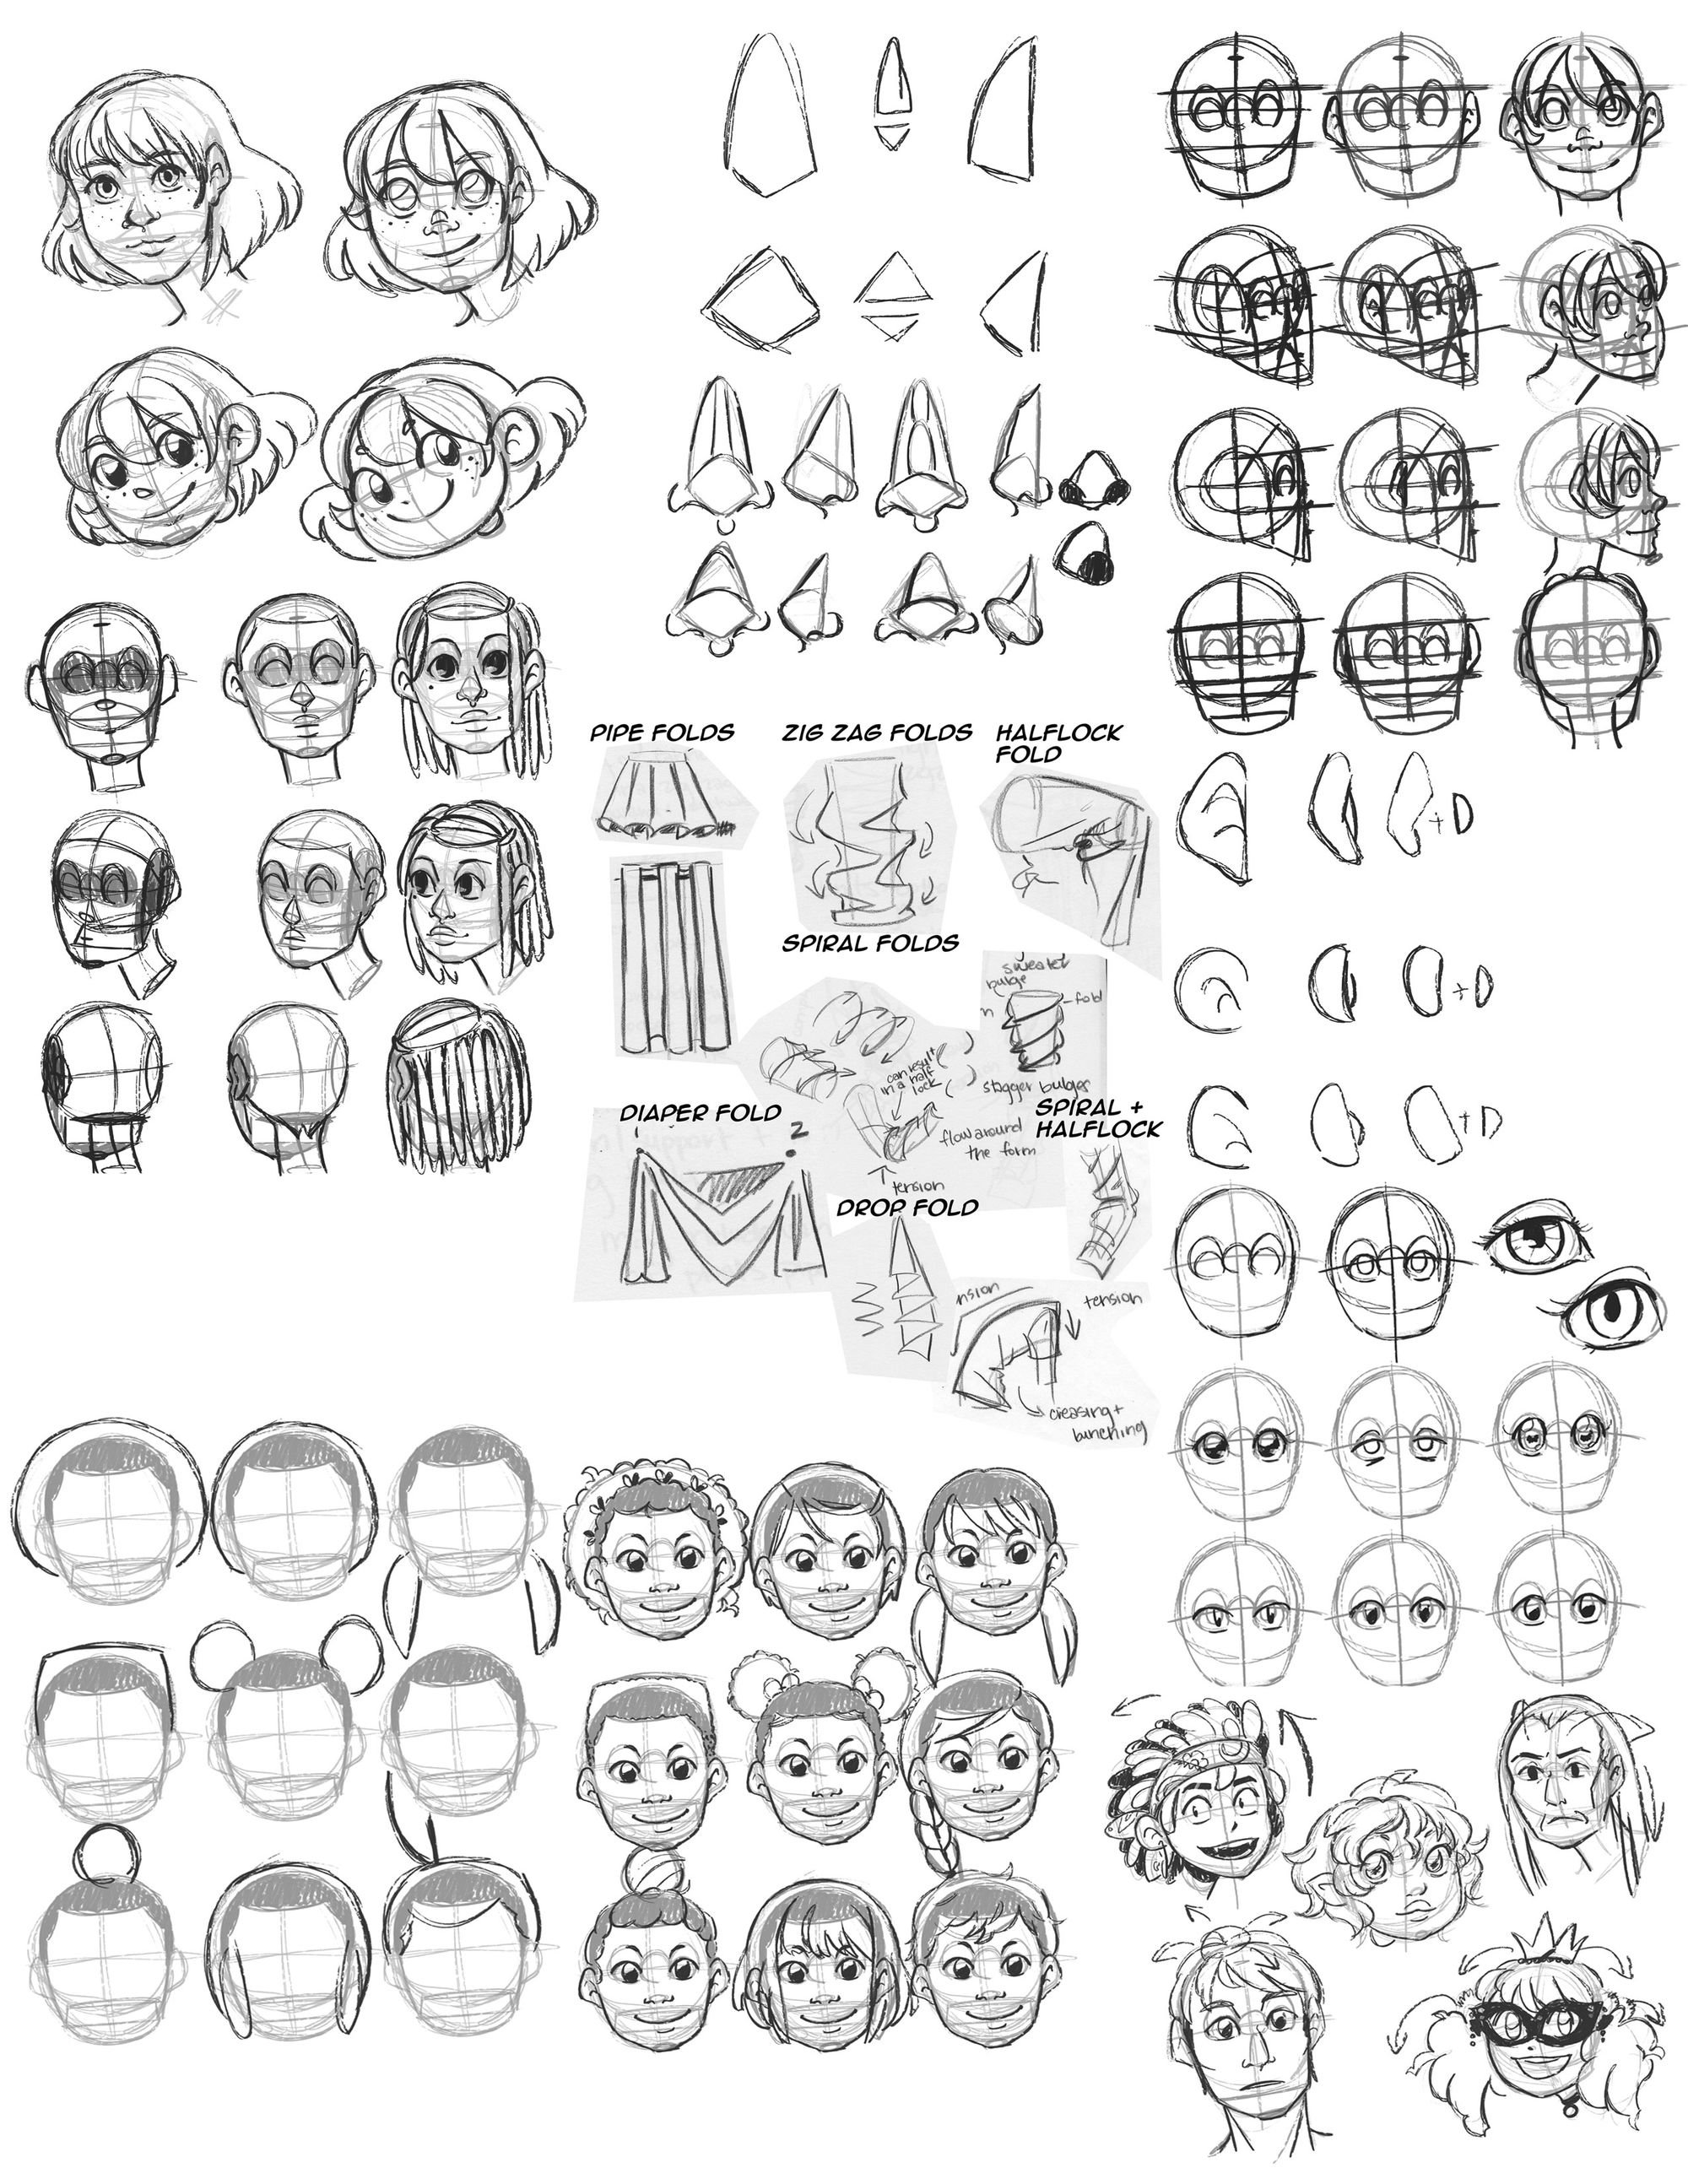 Drawing template demonstrating how to draw heads, facial features, etc from Manga Madness.